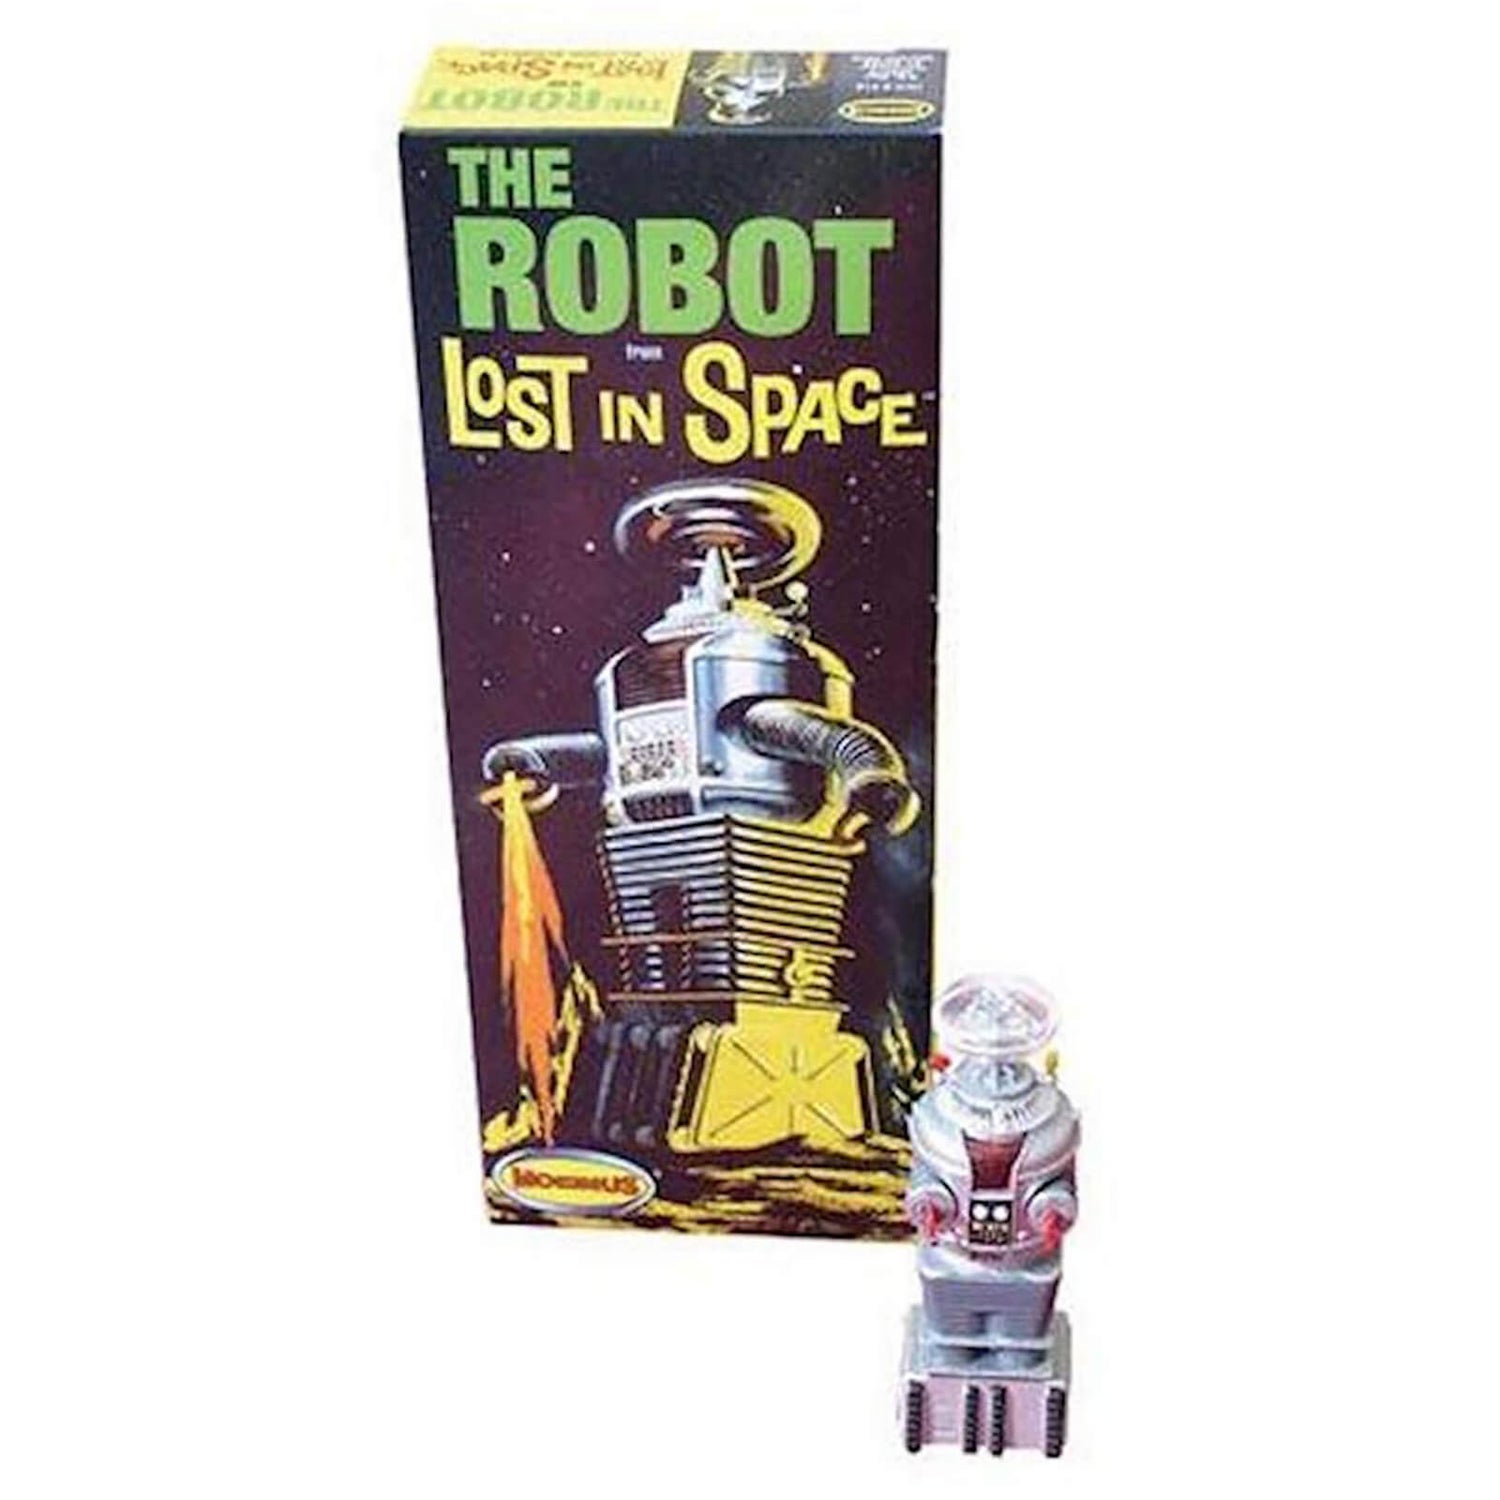 1:24 Lost in Space B9 Roboter - Plastikmodellbausatz